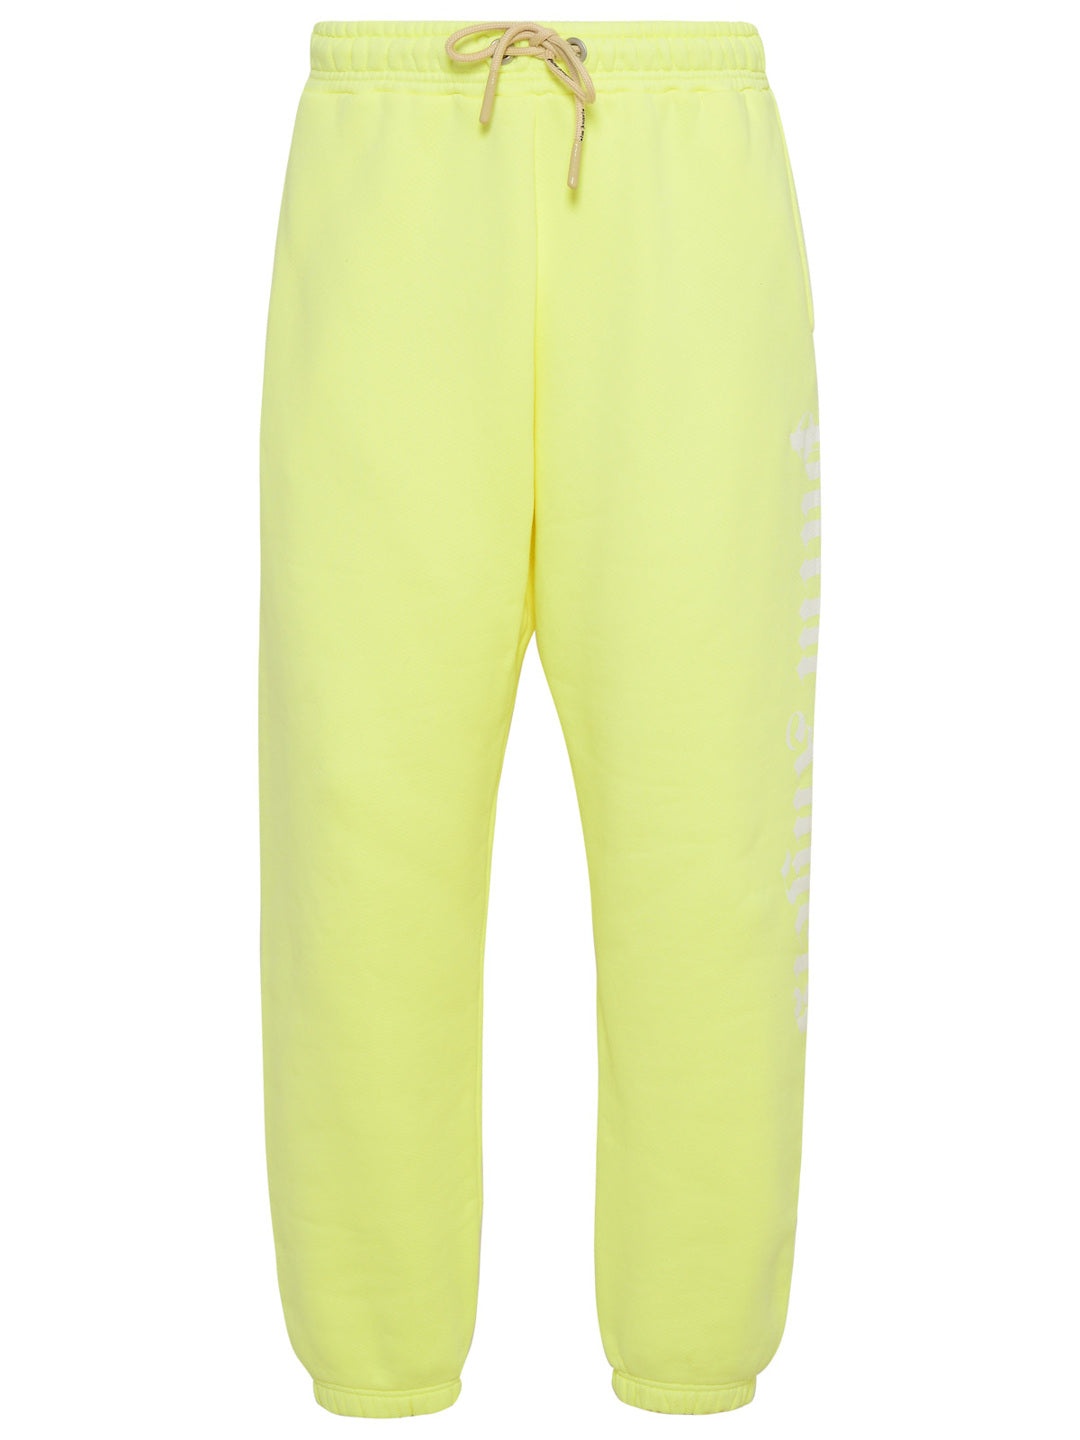 PALM ANGELS Neon Yellow Cotton Track Suit Pants - 1